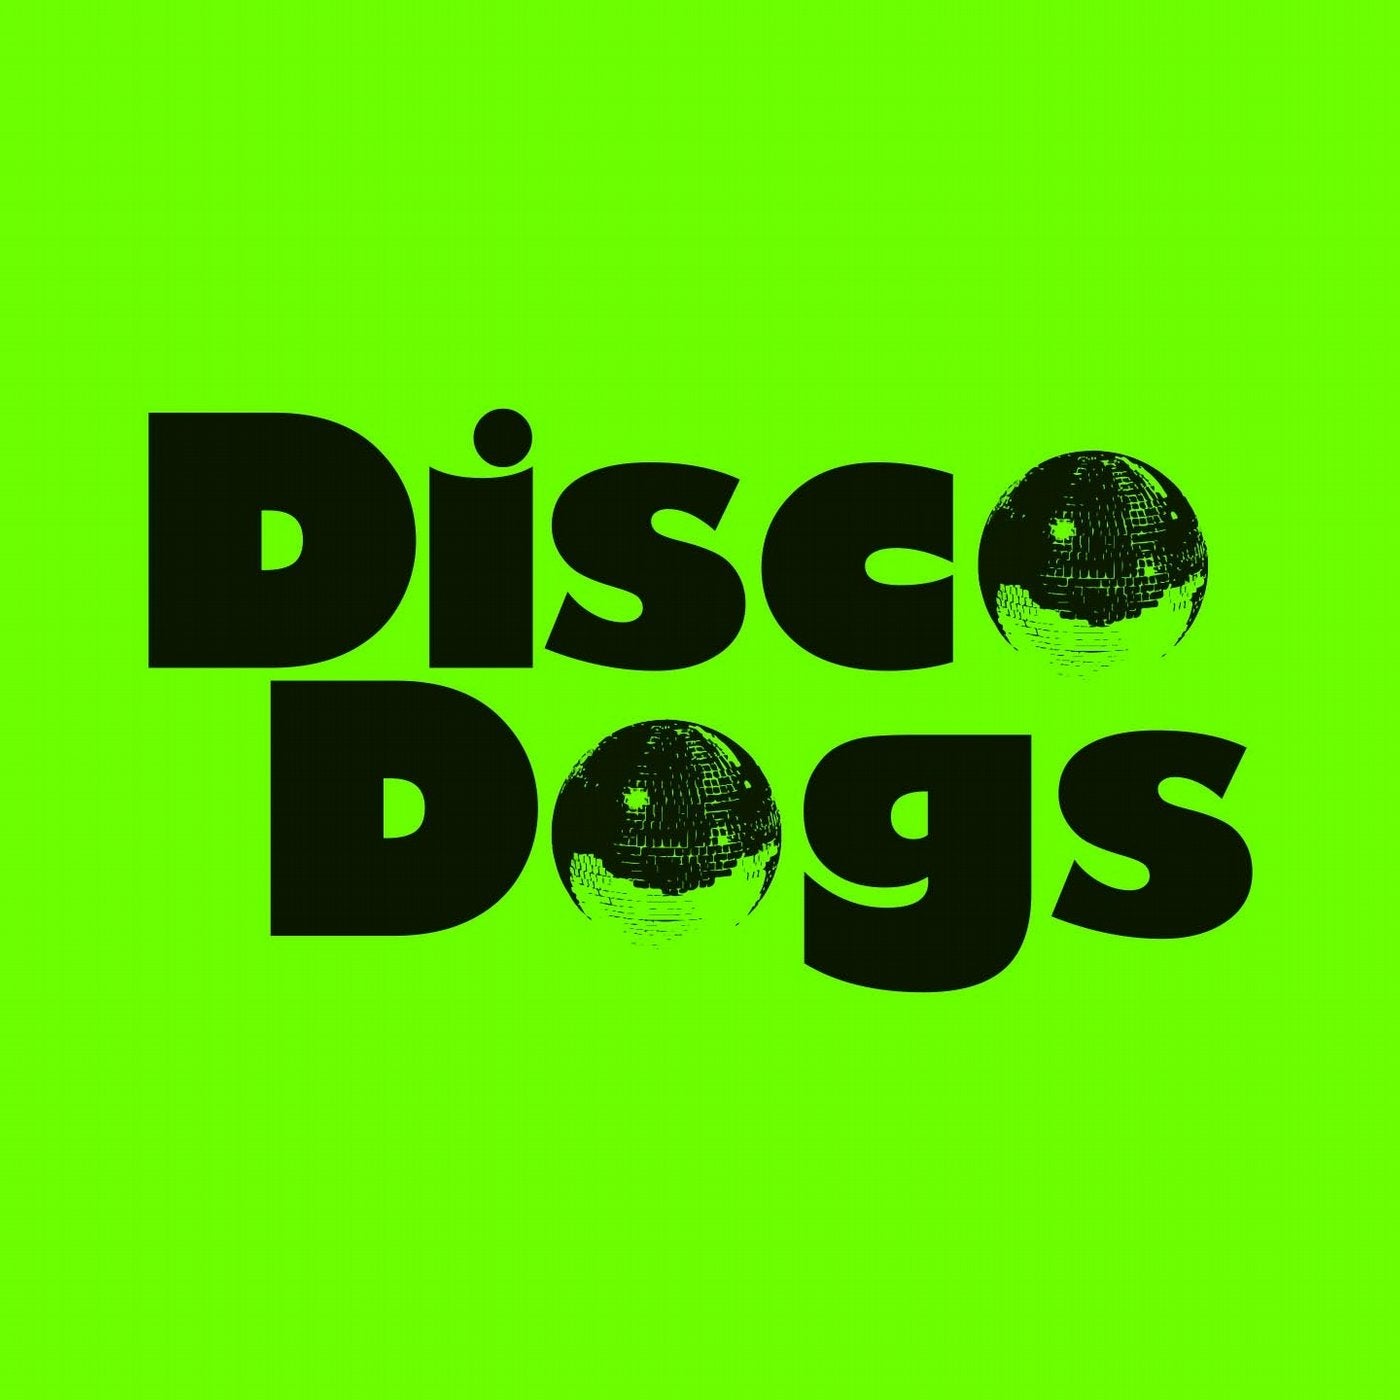 Rush soul. Диско догс. Disco Dogs. Green Dog. Funky Green Dogs Star.